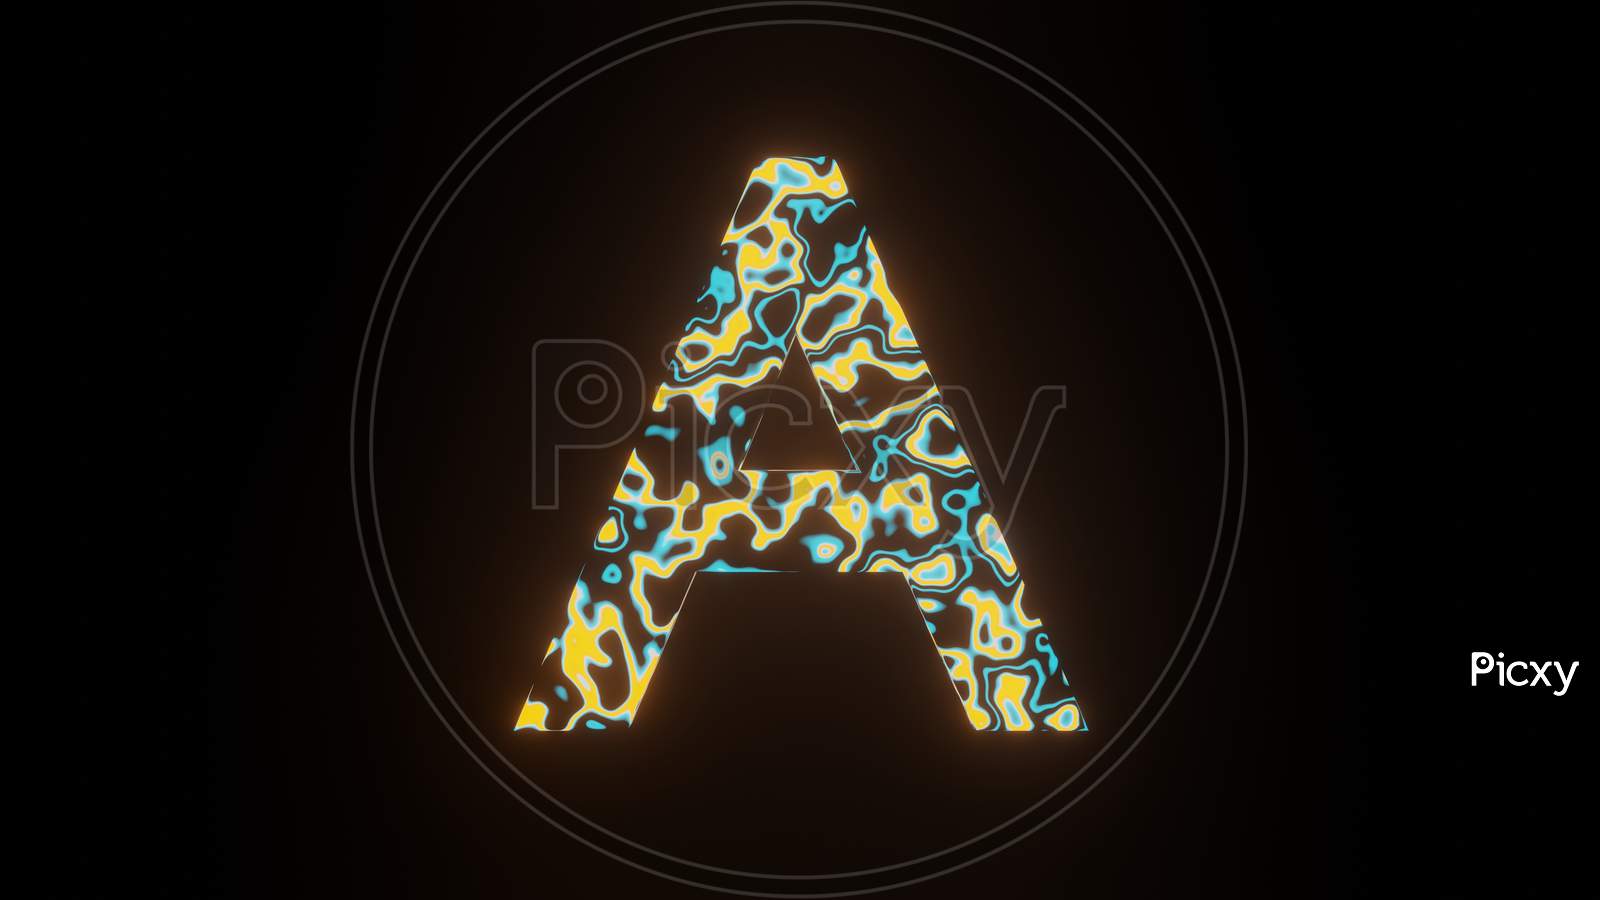 Illustration Graphic Of Beautiful Texture Or Pattern Formation On The Letter A, Isolated On Black Background. 3D Rendering Abstract Loop Neon Lighting Effect On Text A.